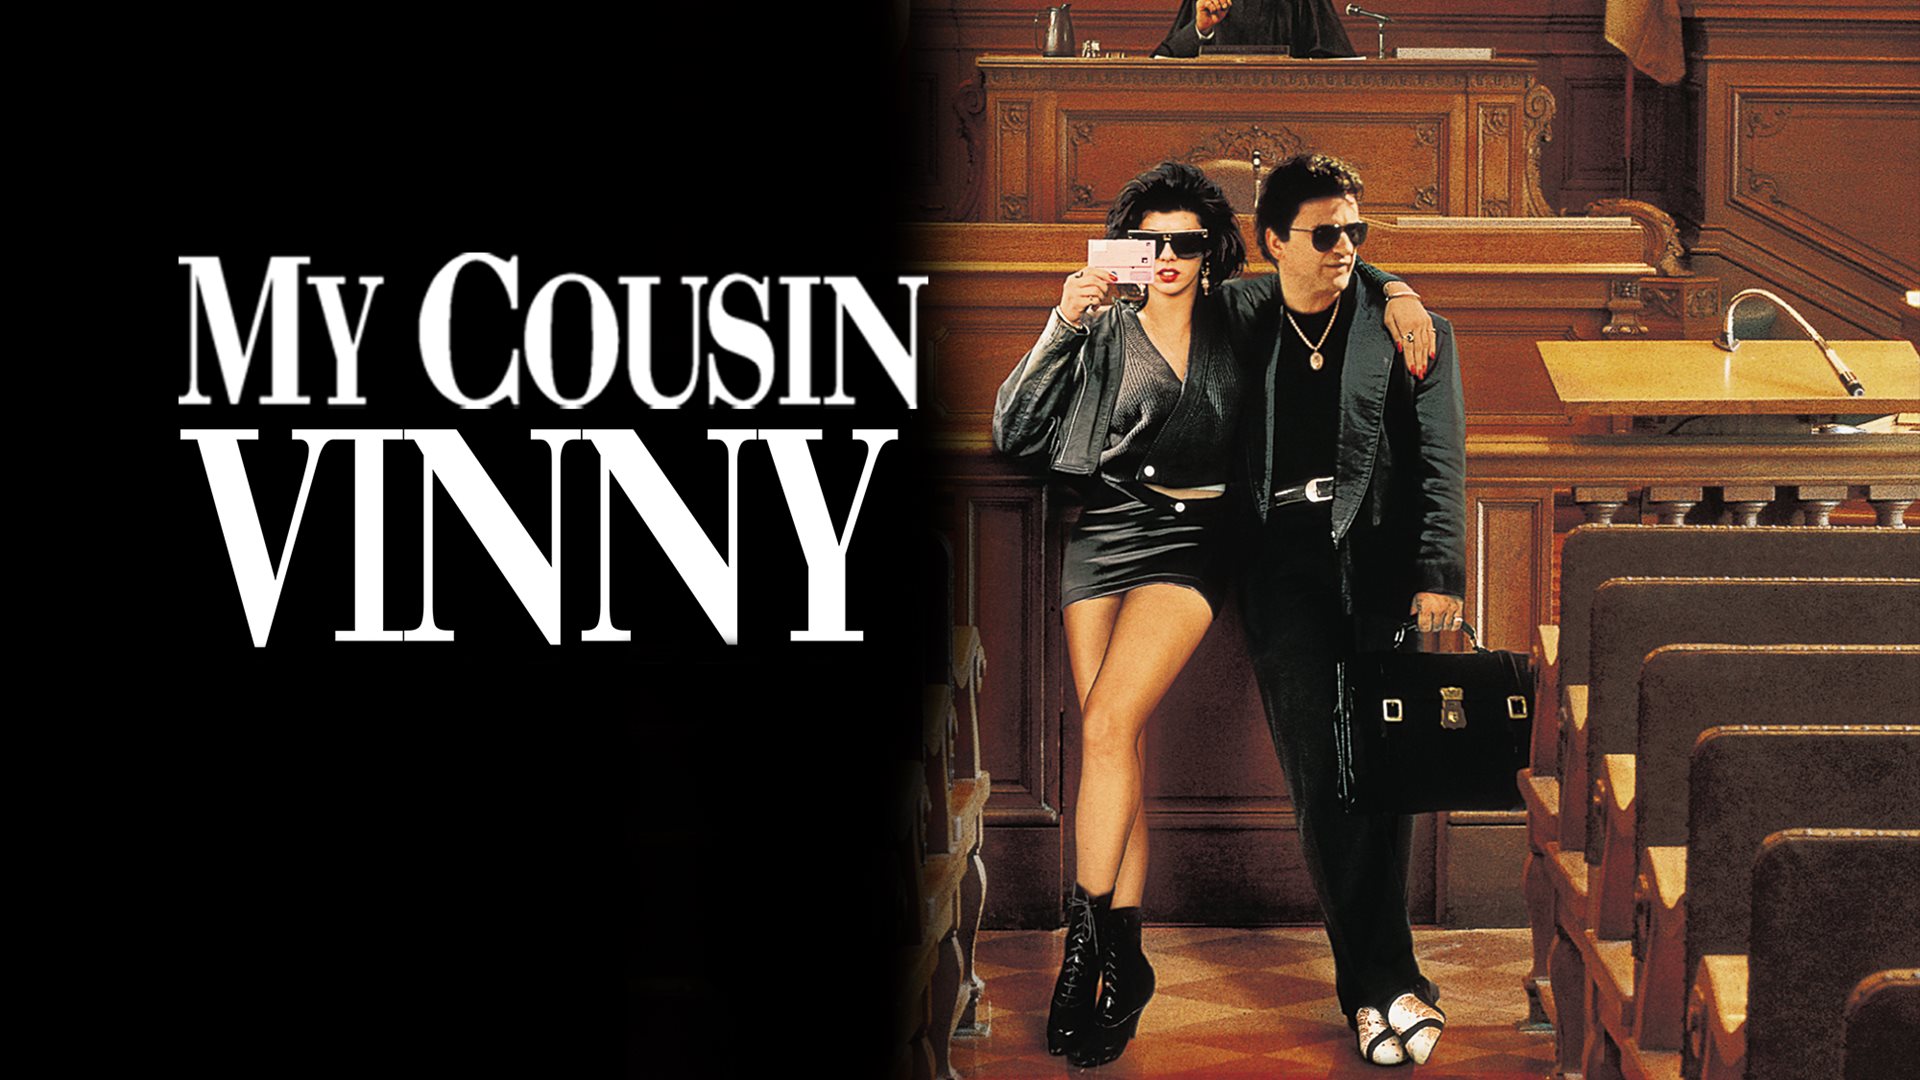 31-facts-about-the-movie-my-cousin-vinny